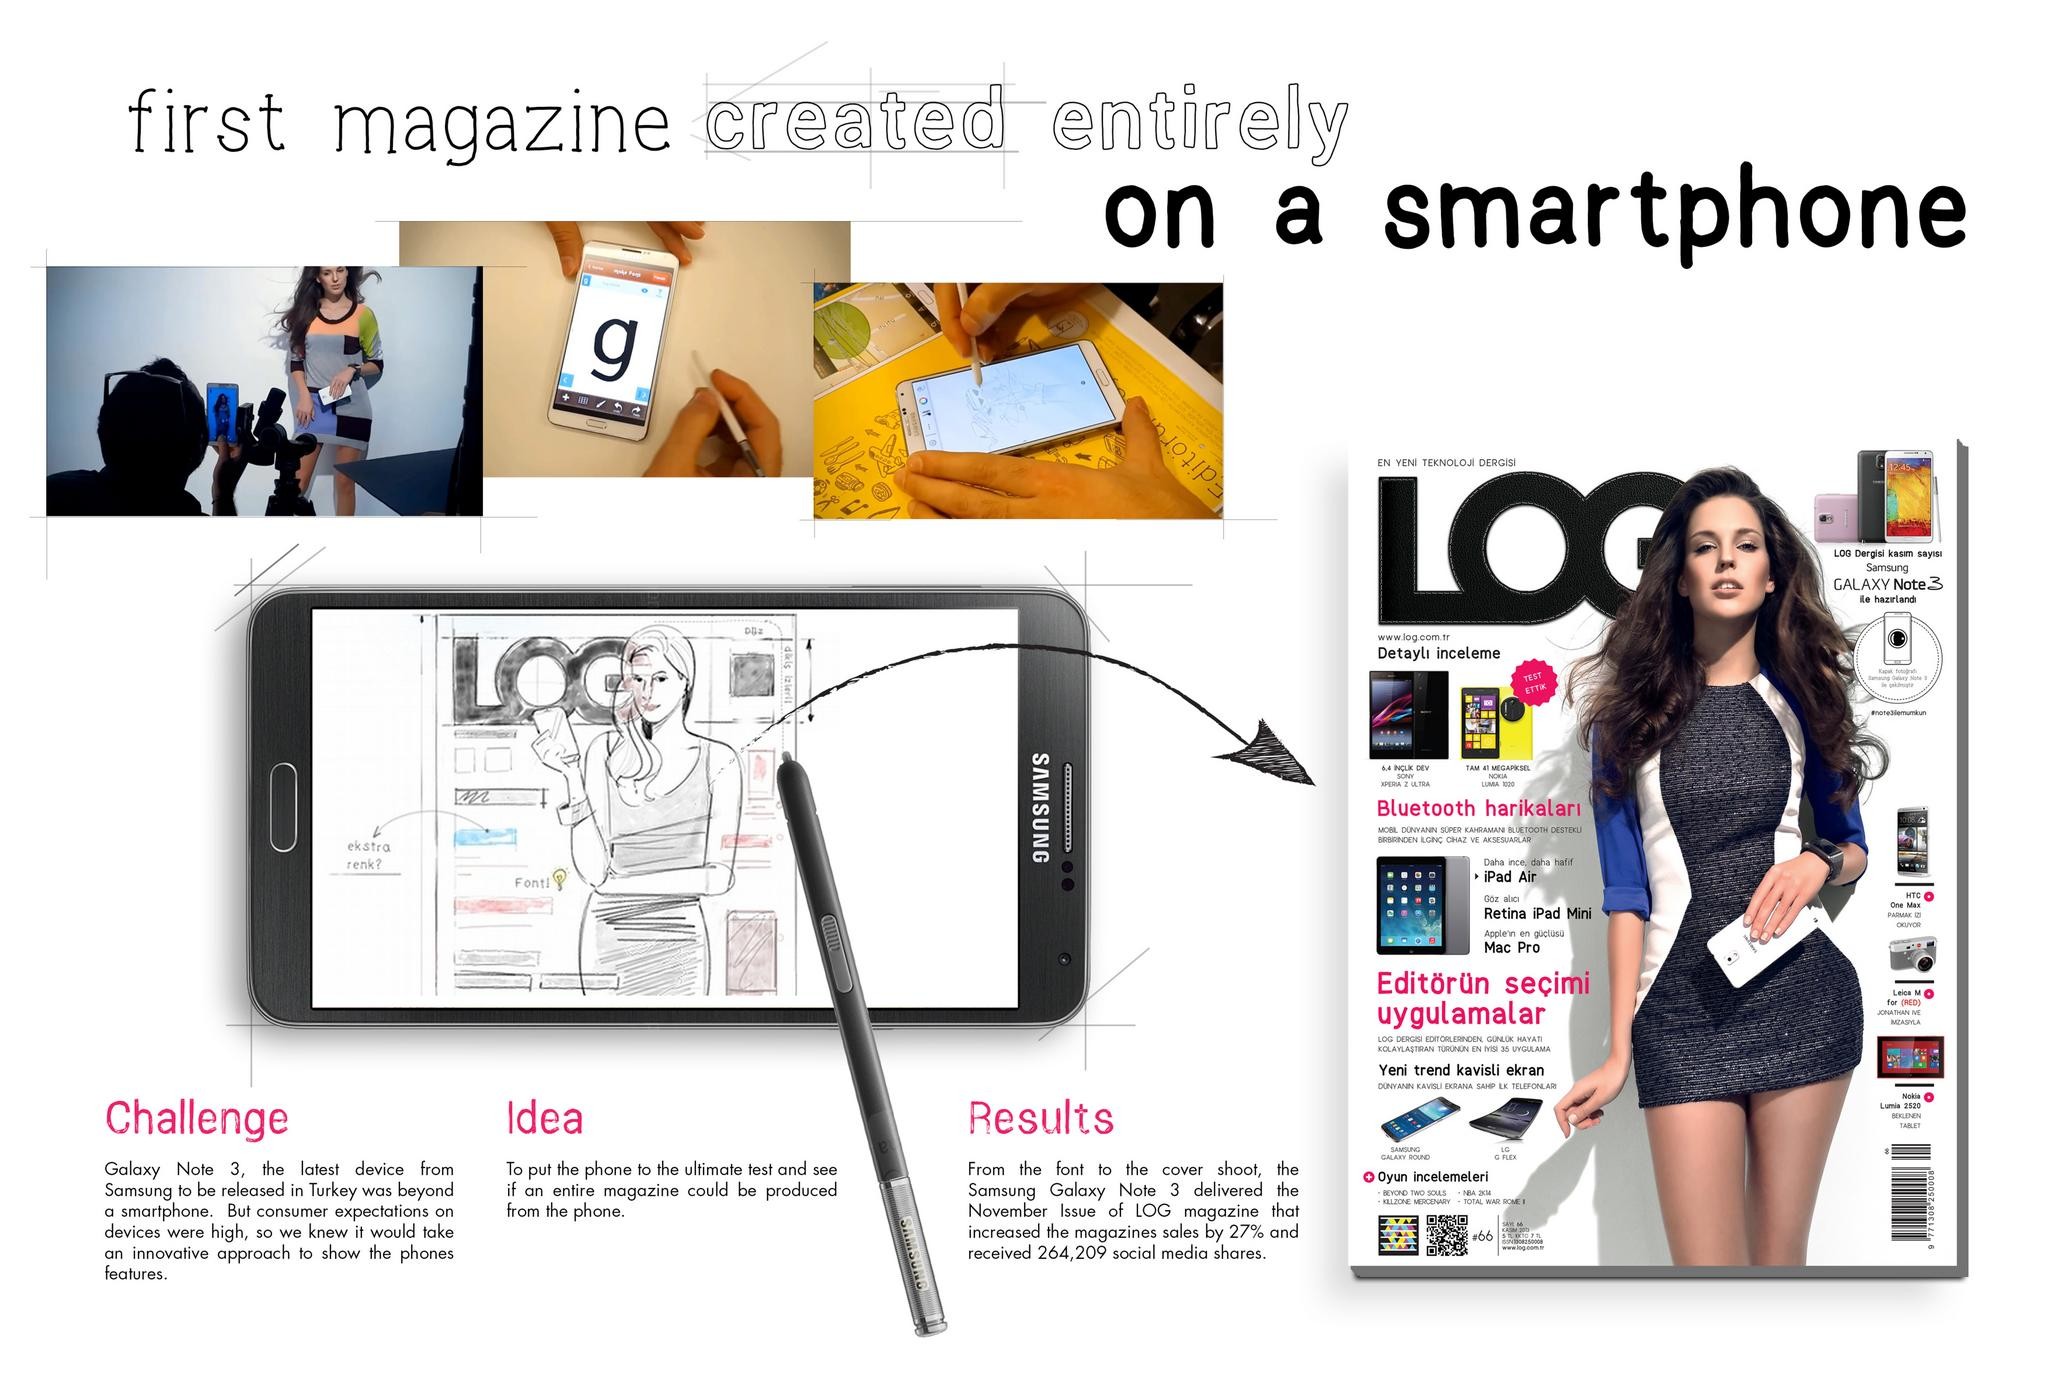 FIRST MAGAZINE CREATED ENTIRELY ON A SMARTPHONE